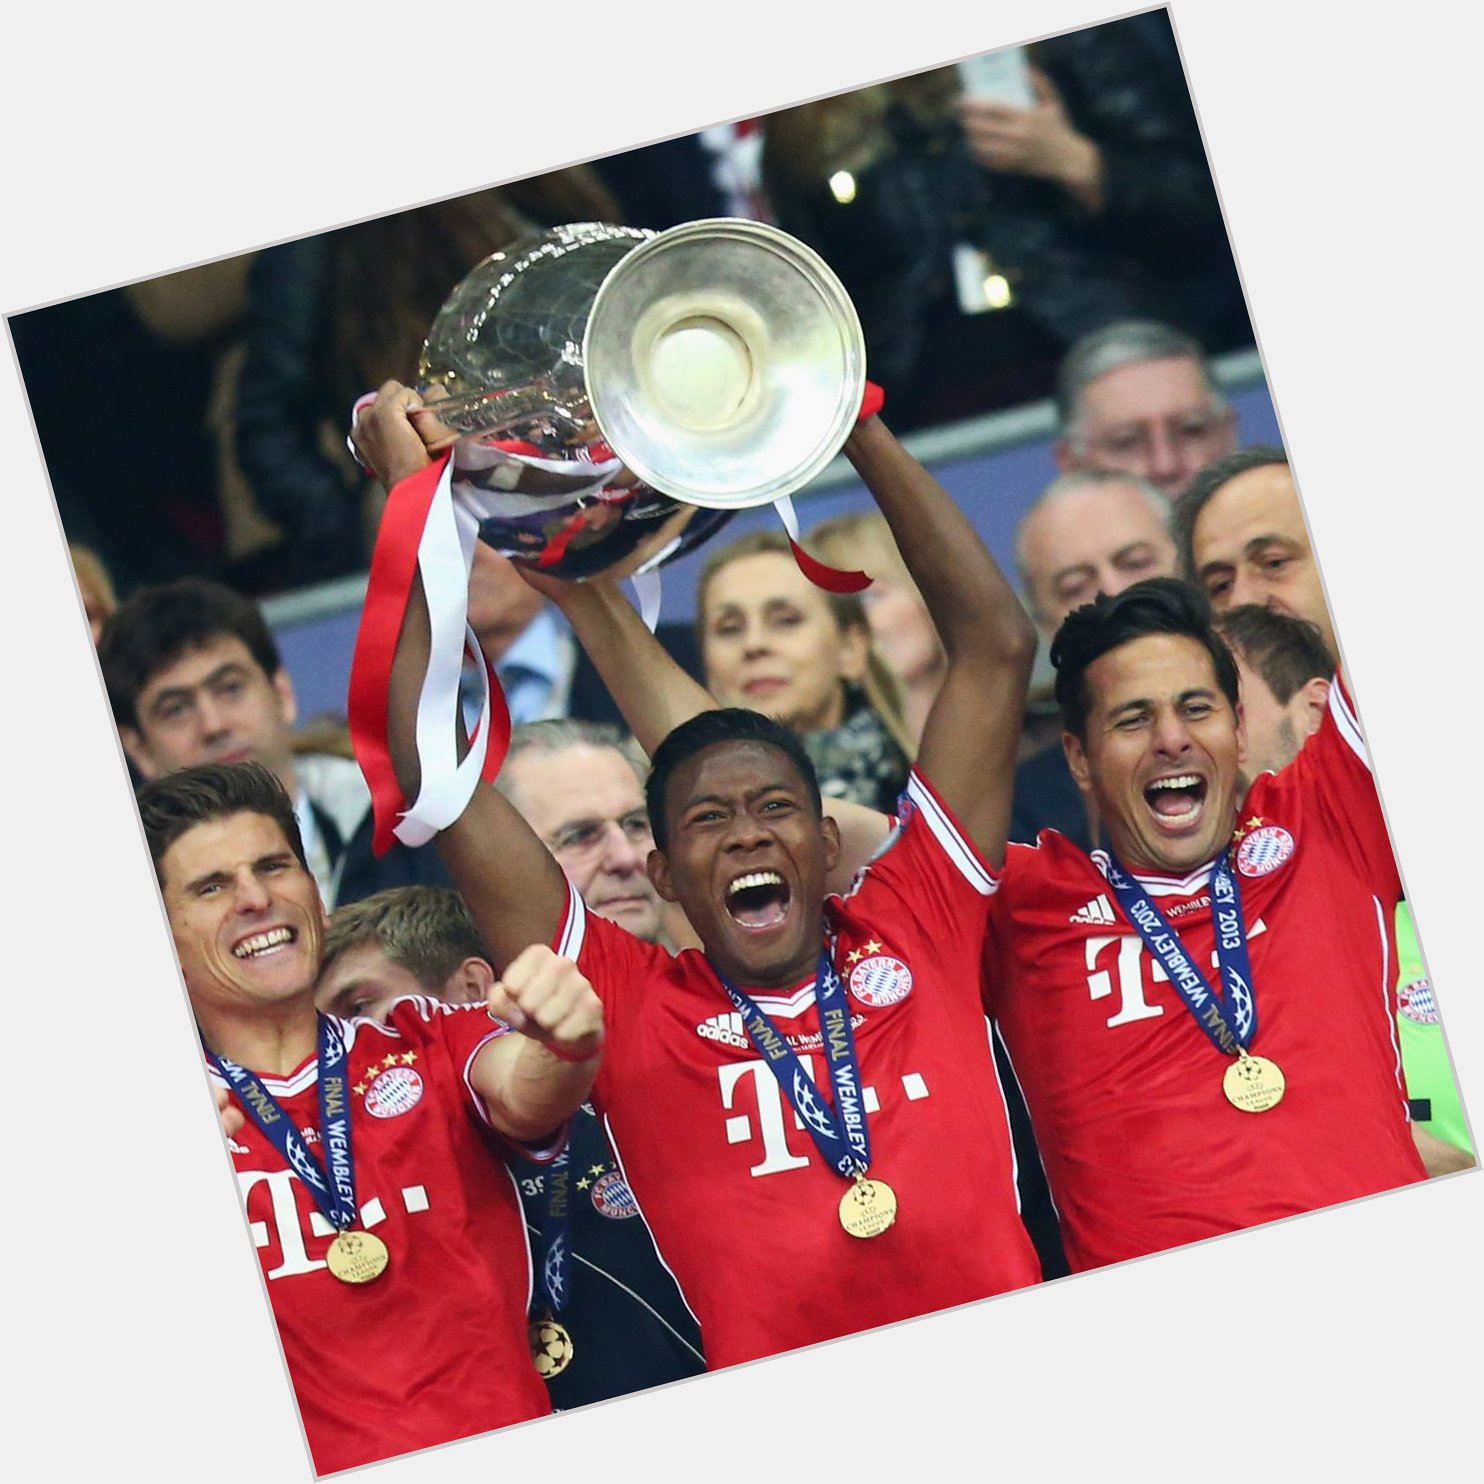 Happy Birthday David Alaba!!  Looking forward to seeing you lift more trophies! 